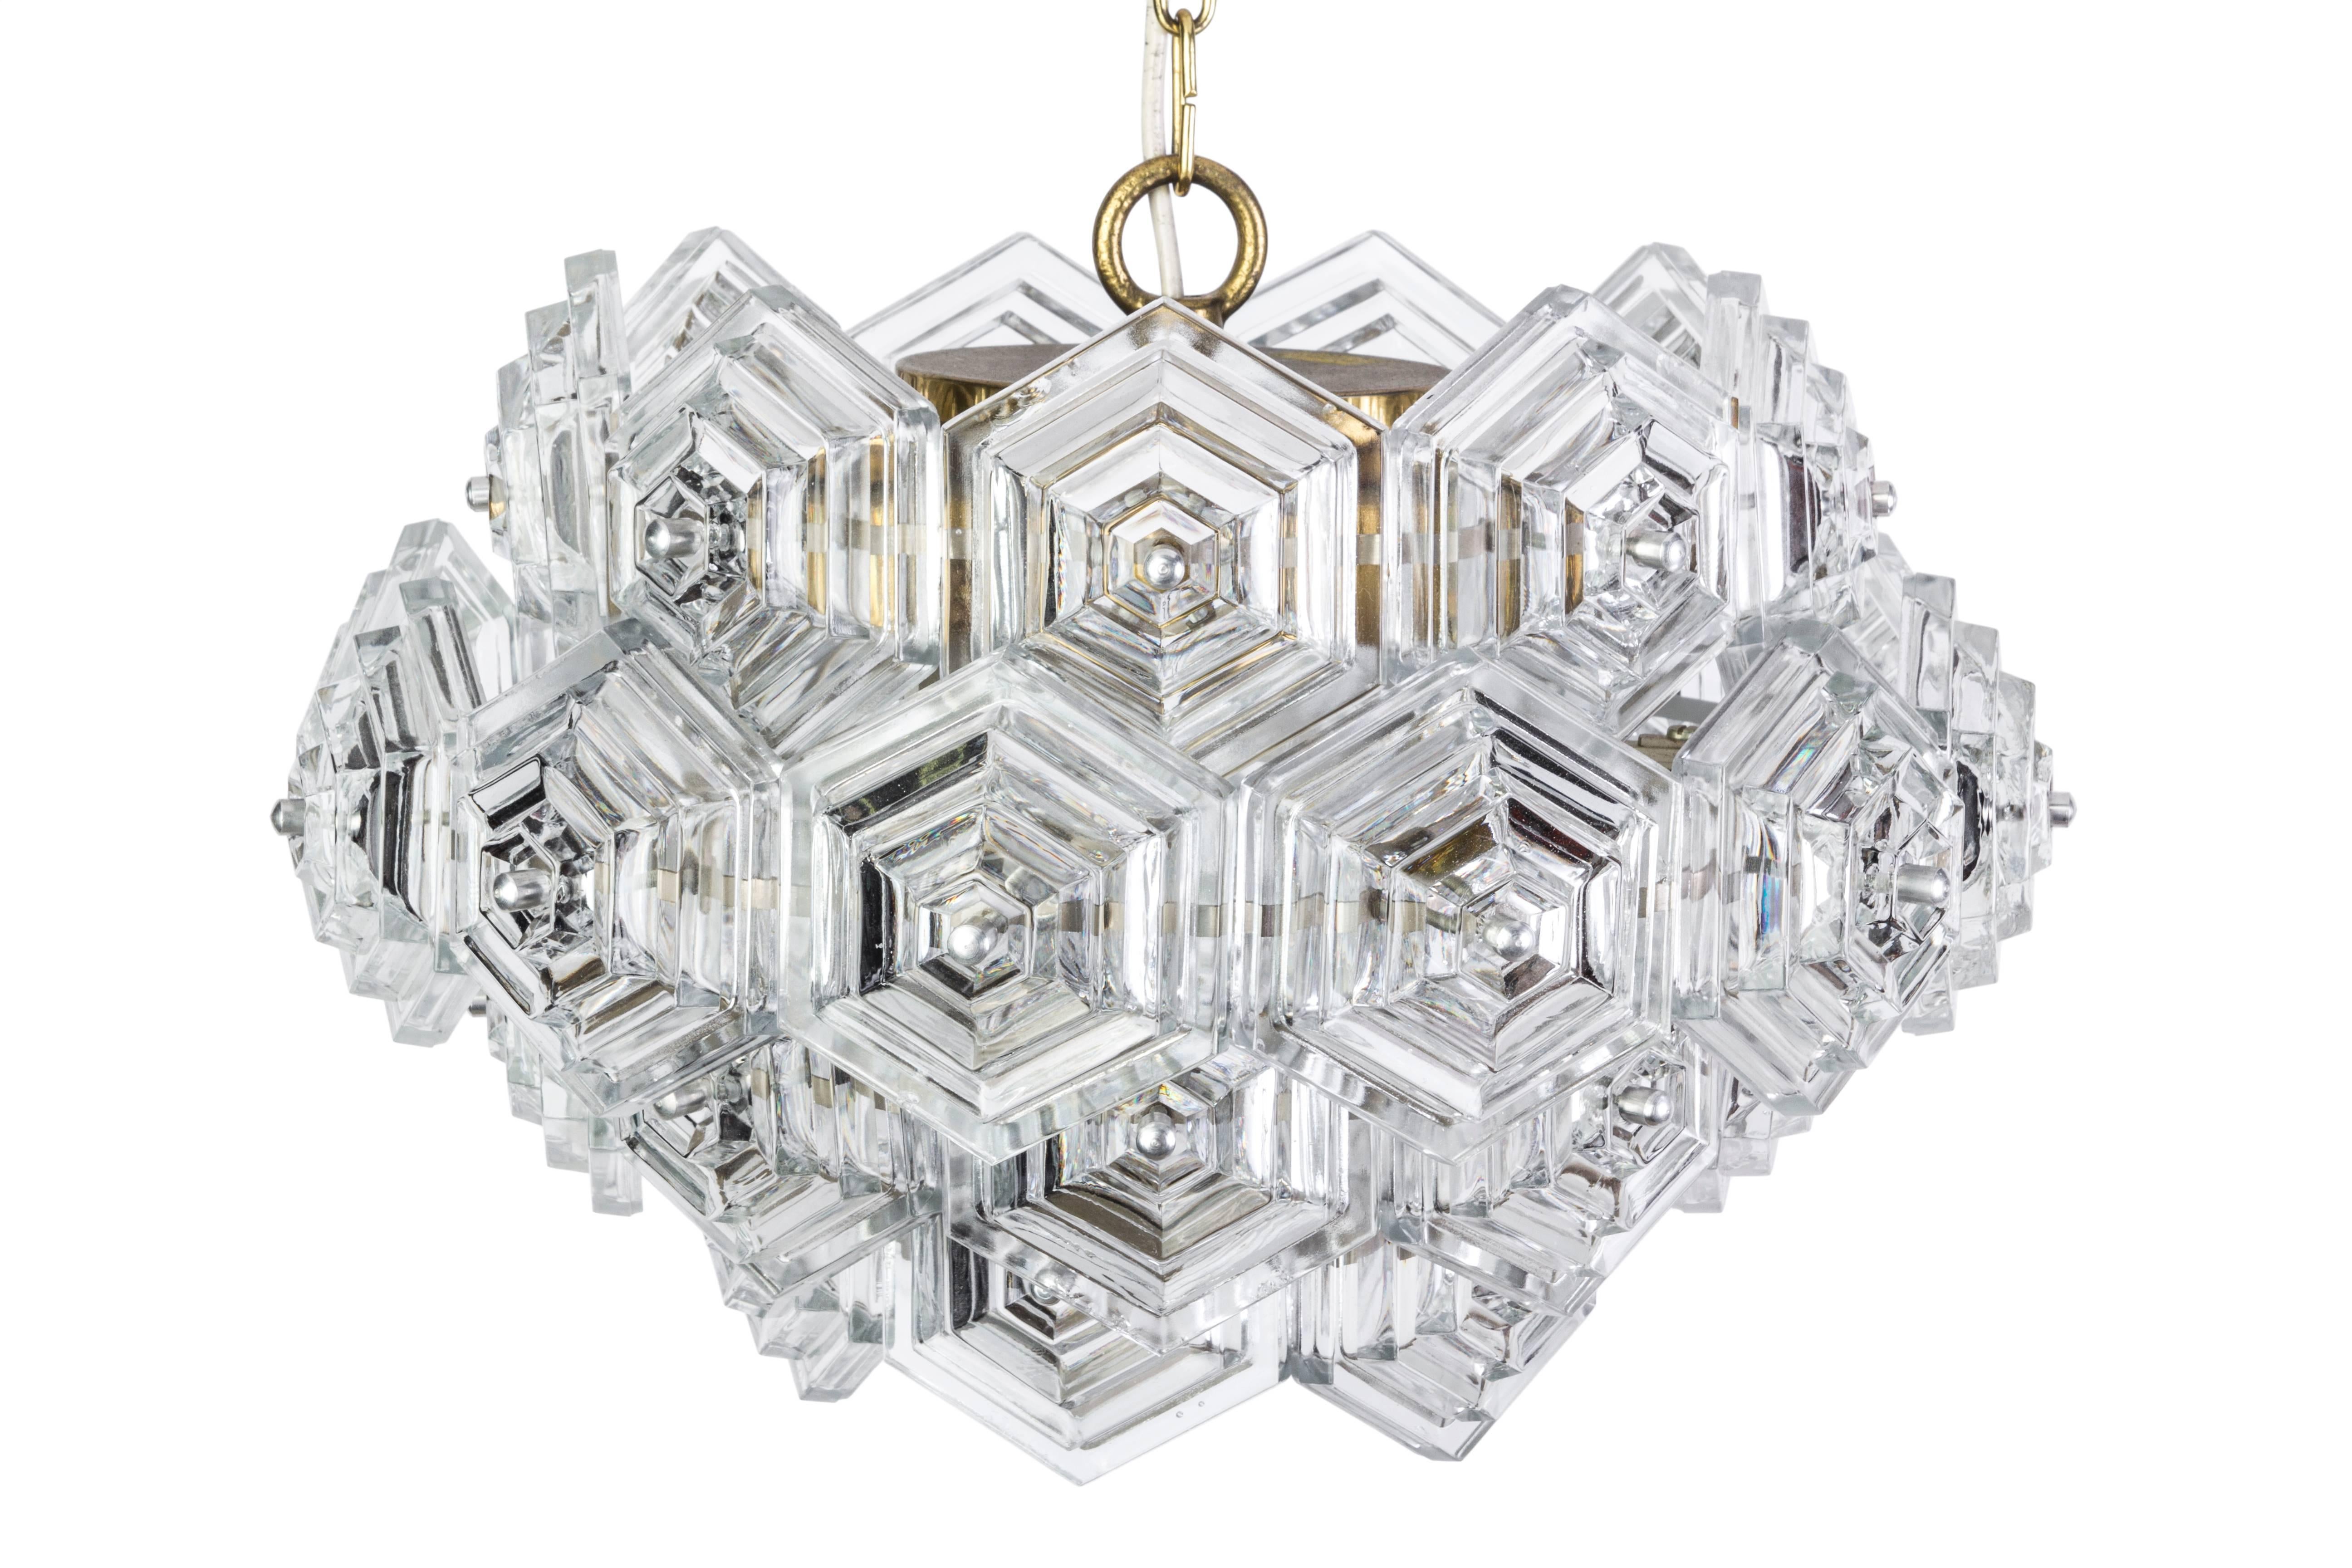 This beautiful Mid-Century Modernist chandelier features a four tiers honey comb design in stylized hexagonal form of clear crystals attached to a brass chain. It is in excellent condition and has been newly rewired.